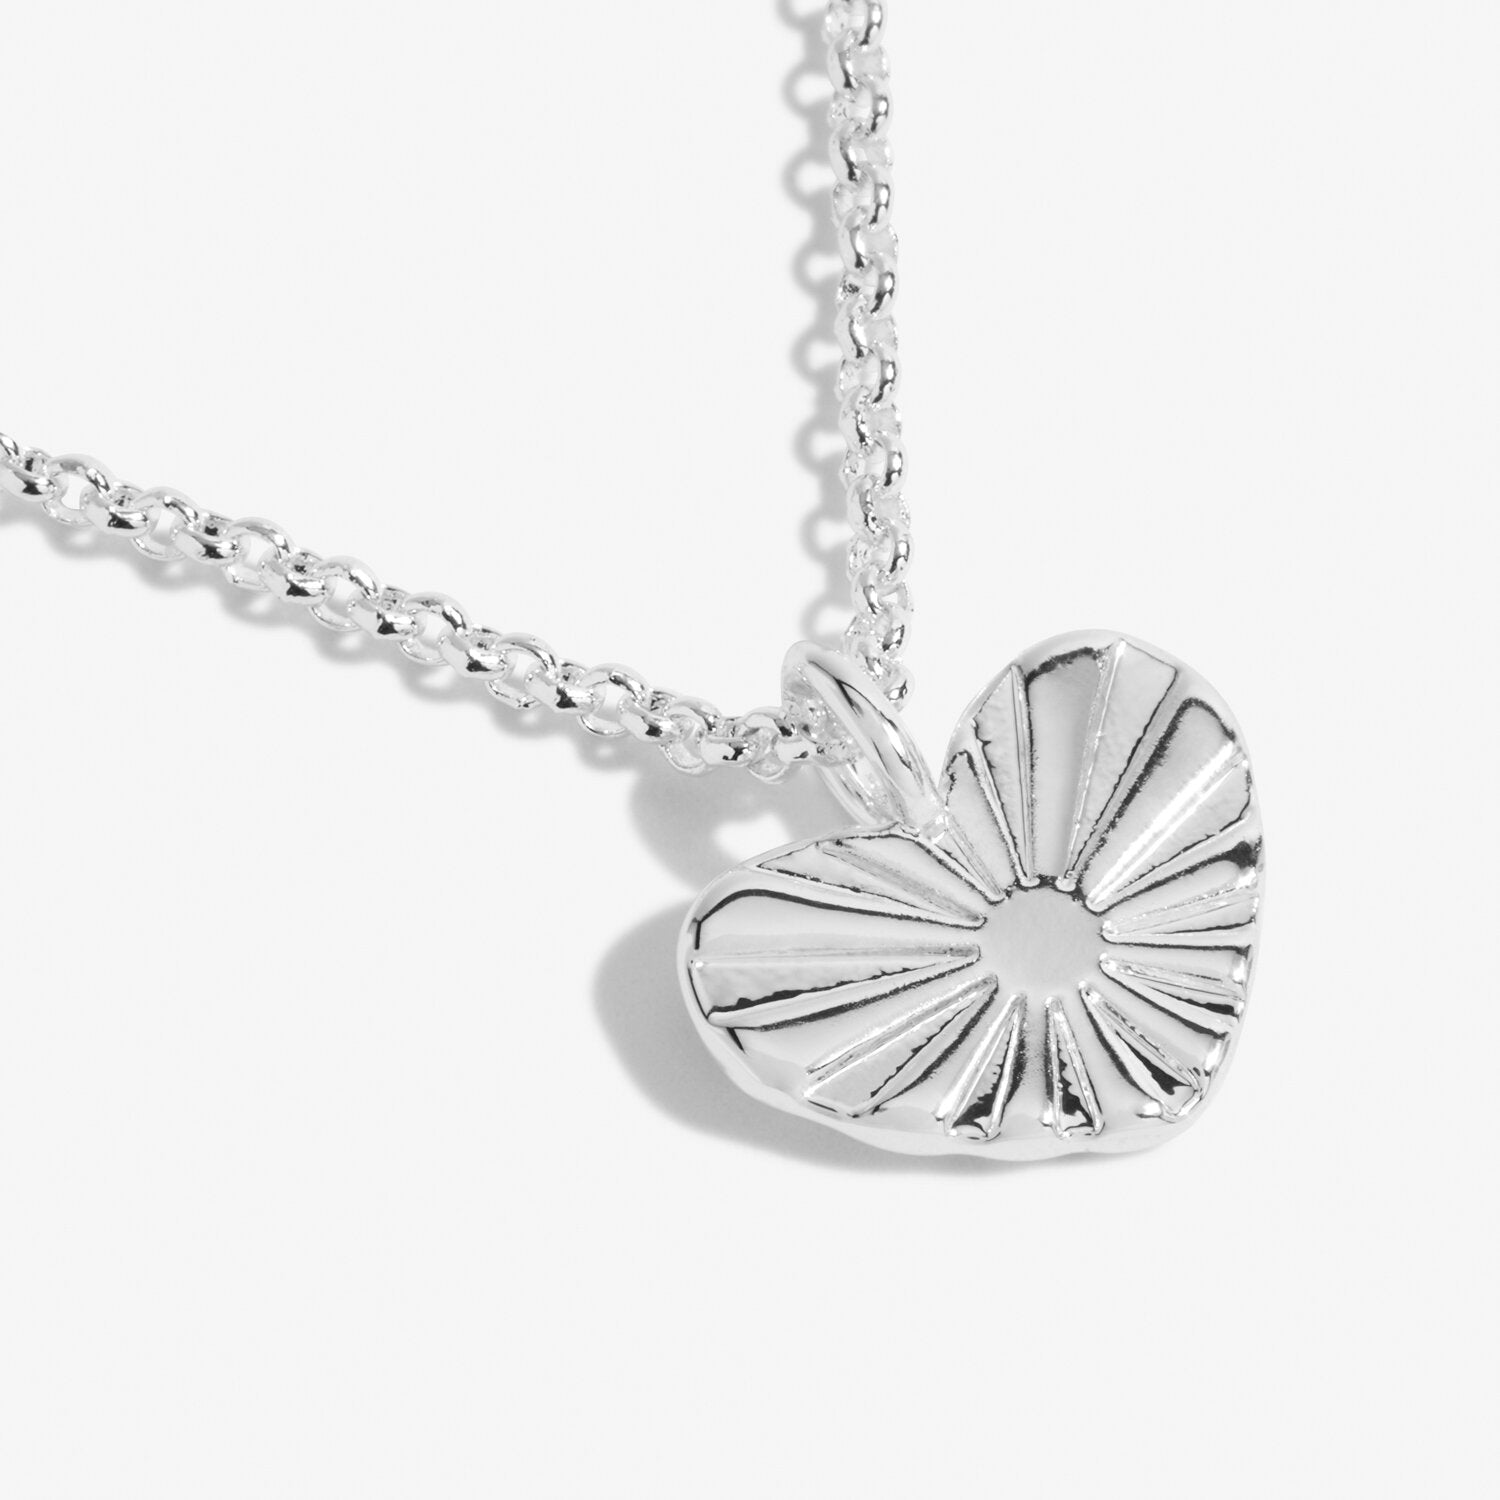 A Little - She Believed She Could So She Did Necklace - Joma jewellery